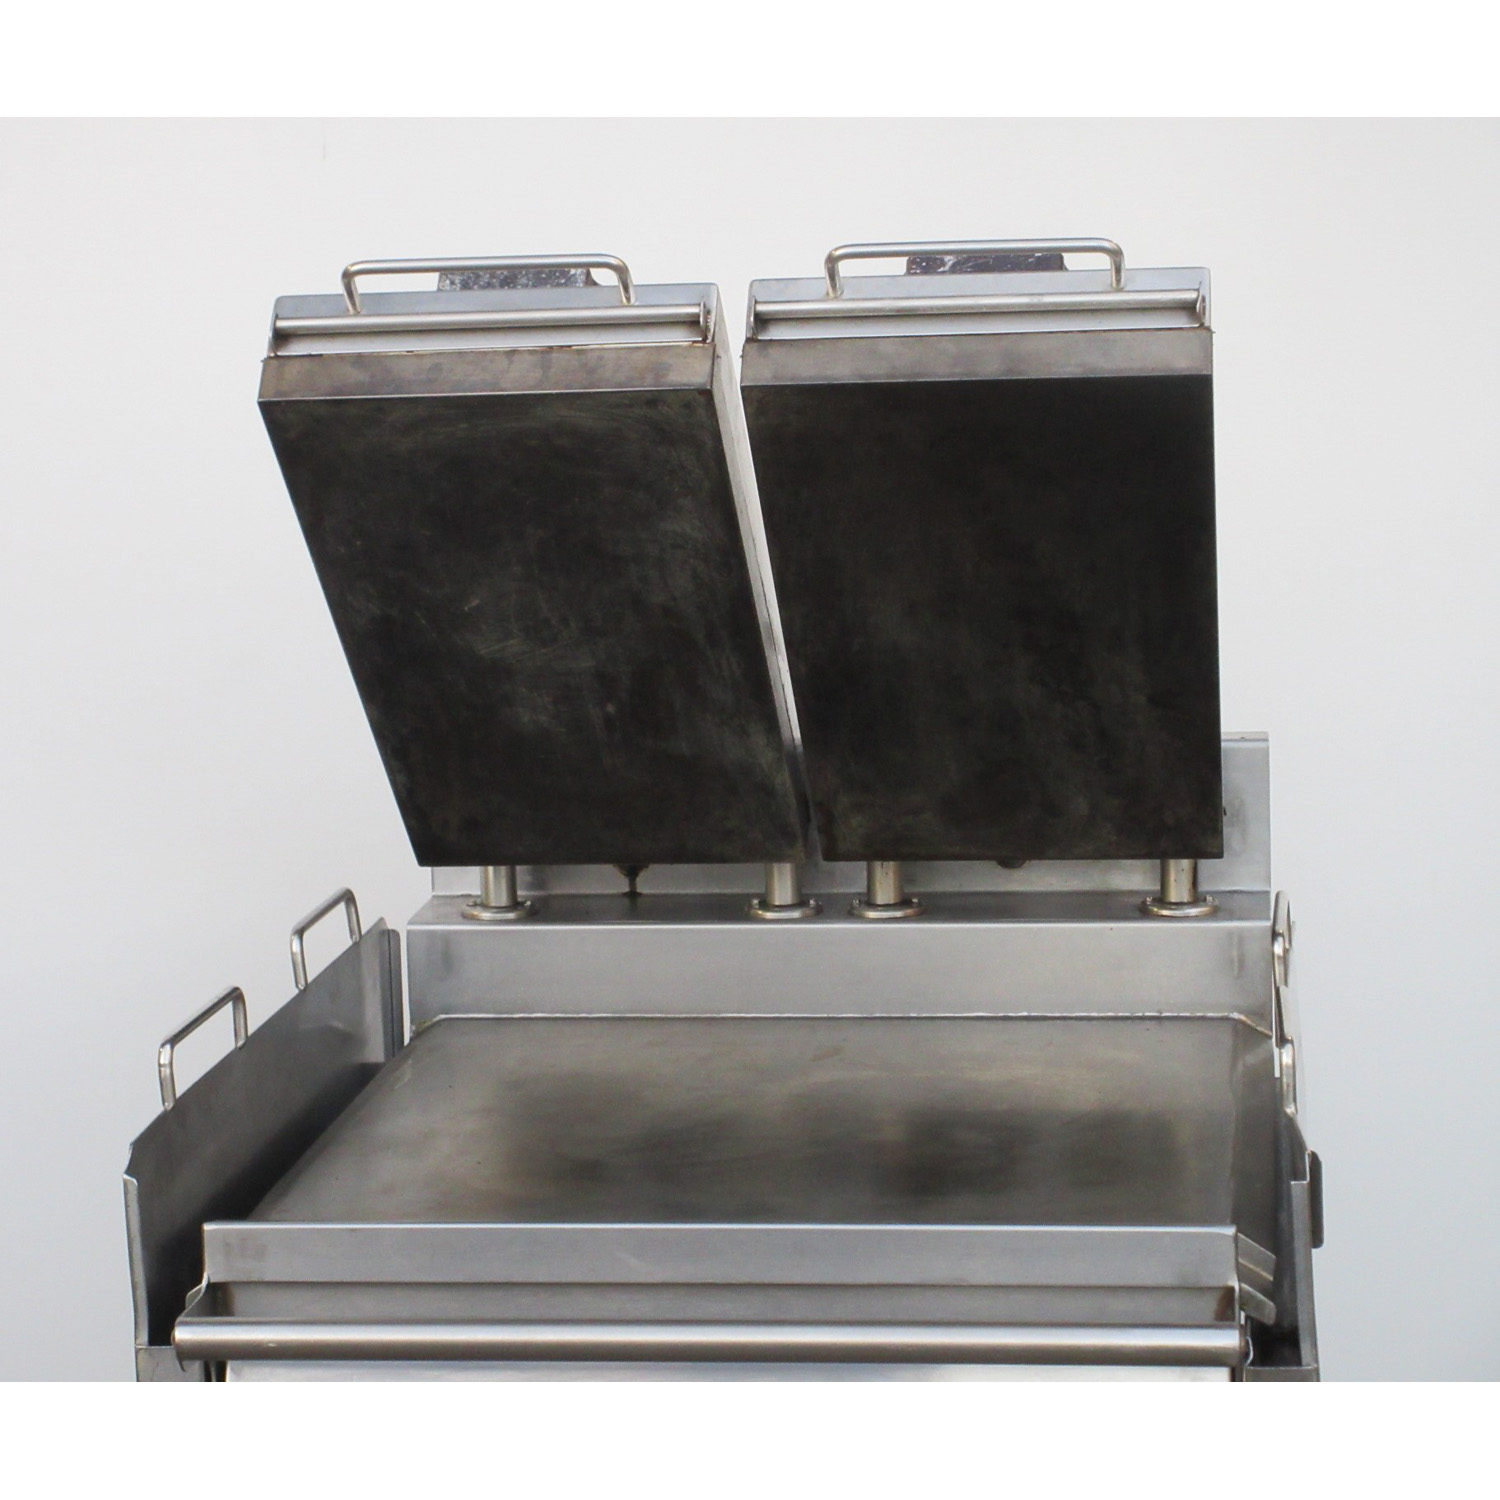 Garland XG24 Clamshell Griddle Two-Sided, Gas, Used Excellent Condition image 1